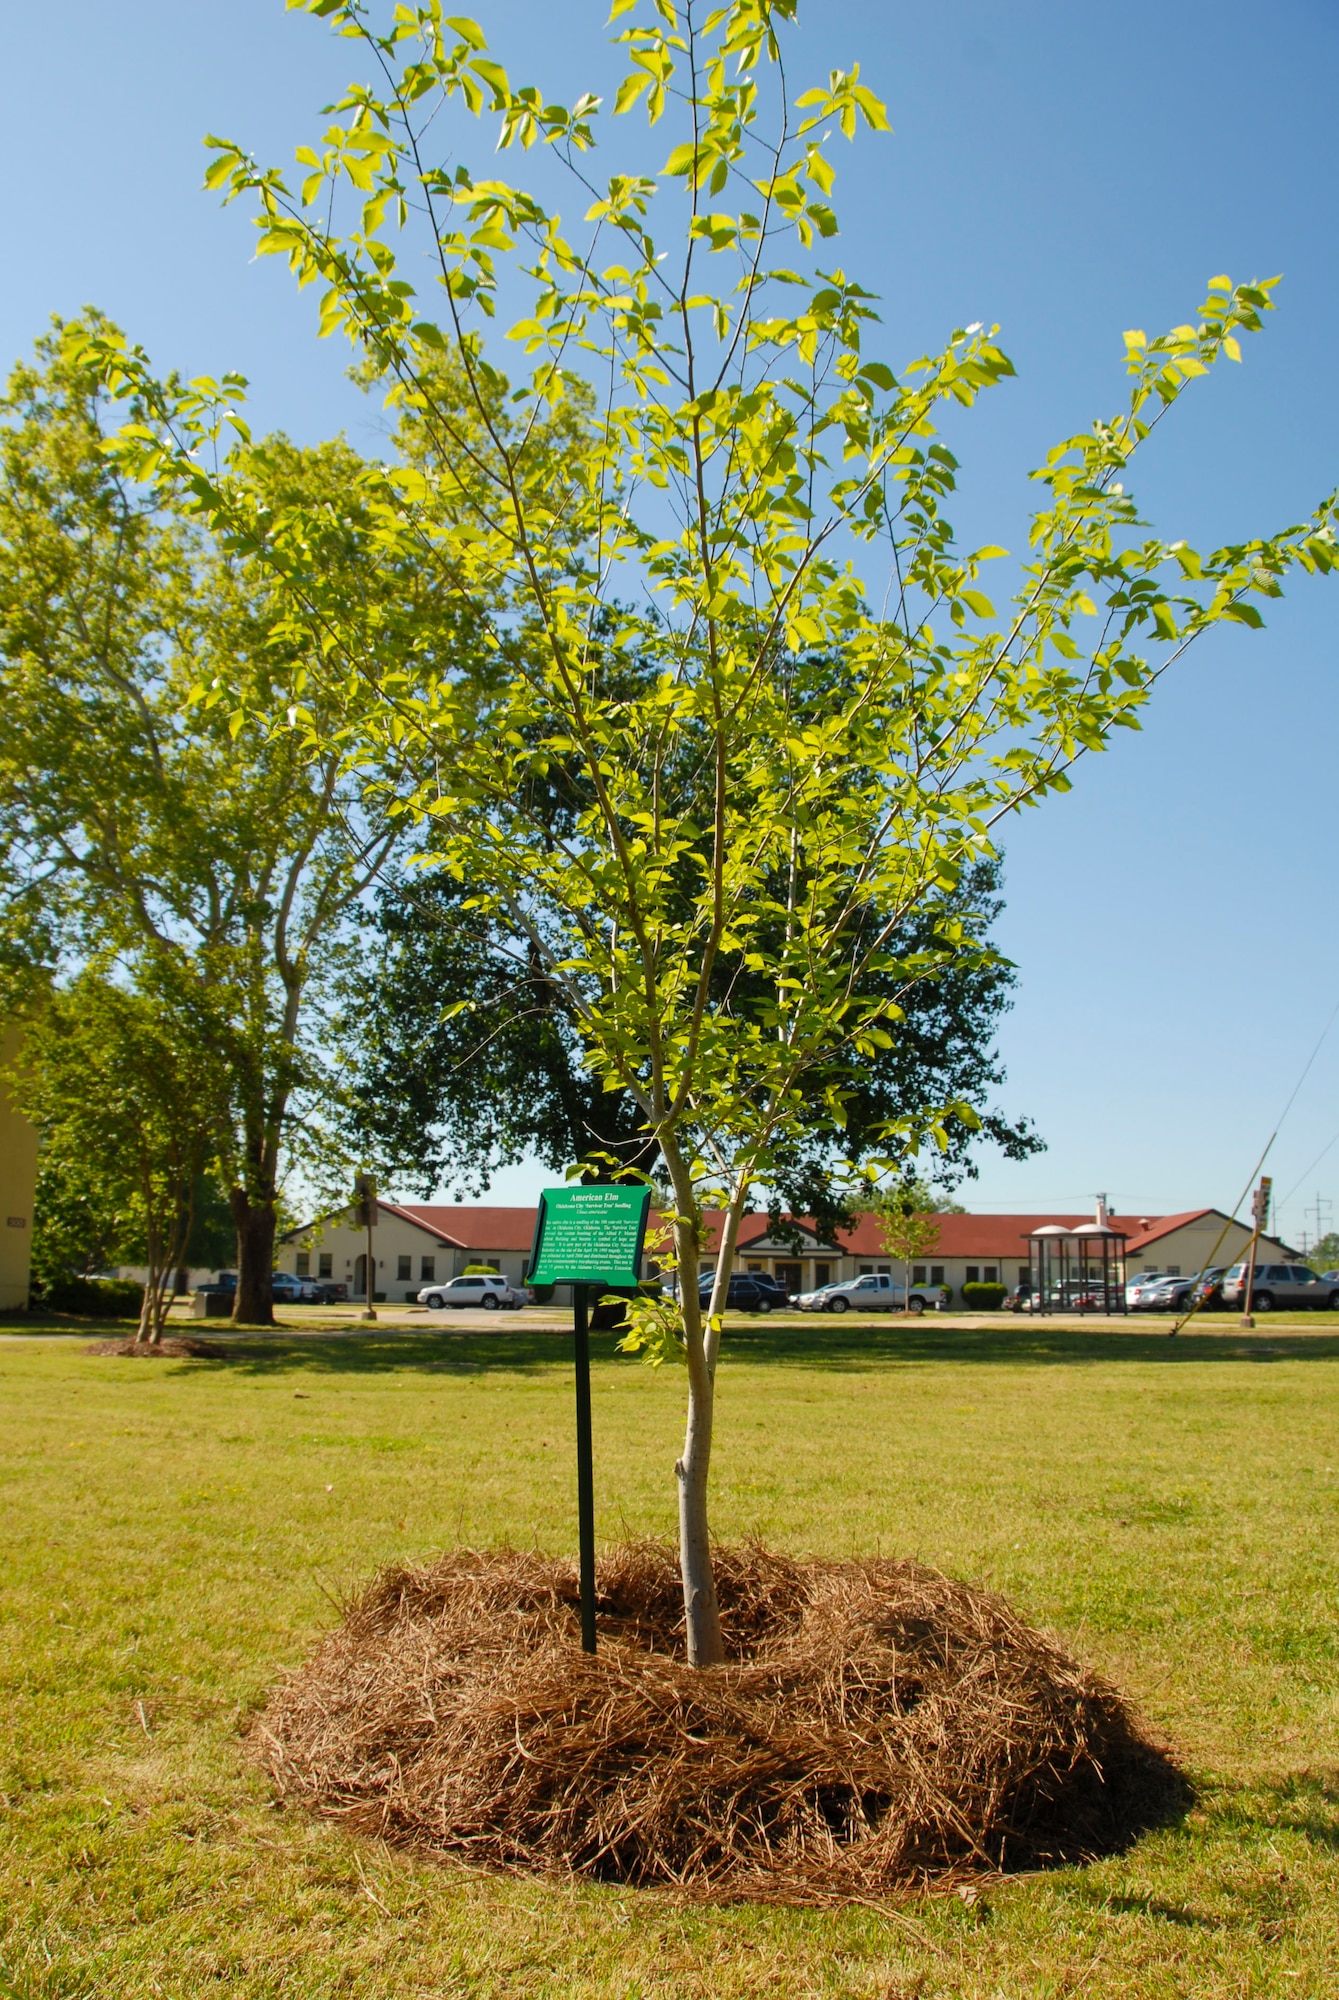 The Maxwell “survivor” tree was dedicated April 24 by 42nd Air Base Wing Commander Kris D. Beasley as part of Earth Day celebration. Planted in the fall at the corner of East Maxwell Boulevard and Magnolia Boulevard, the tree grew from a seed from a tree that survived the 1995 bombing of the Alfred P. Murrah Federal Office Building in Oklahoma City, Okla. (U.S. Air Force photo by Jamie Pitcher)